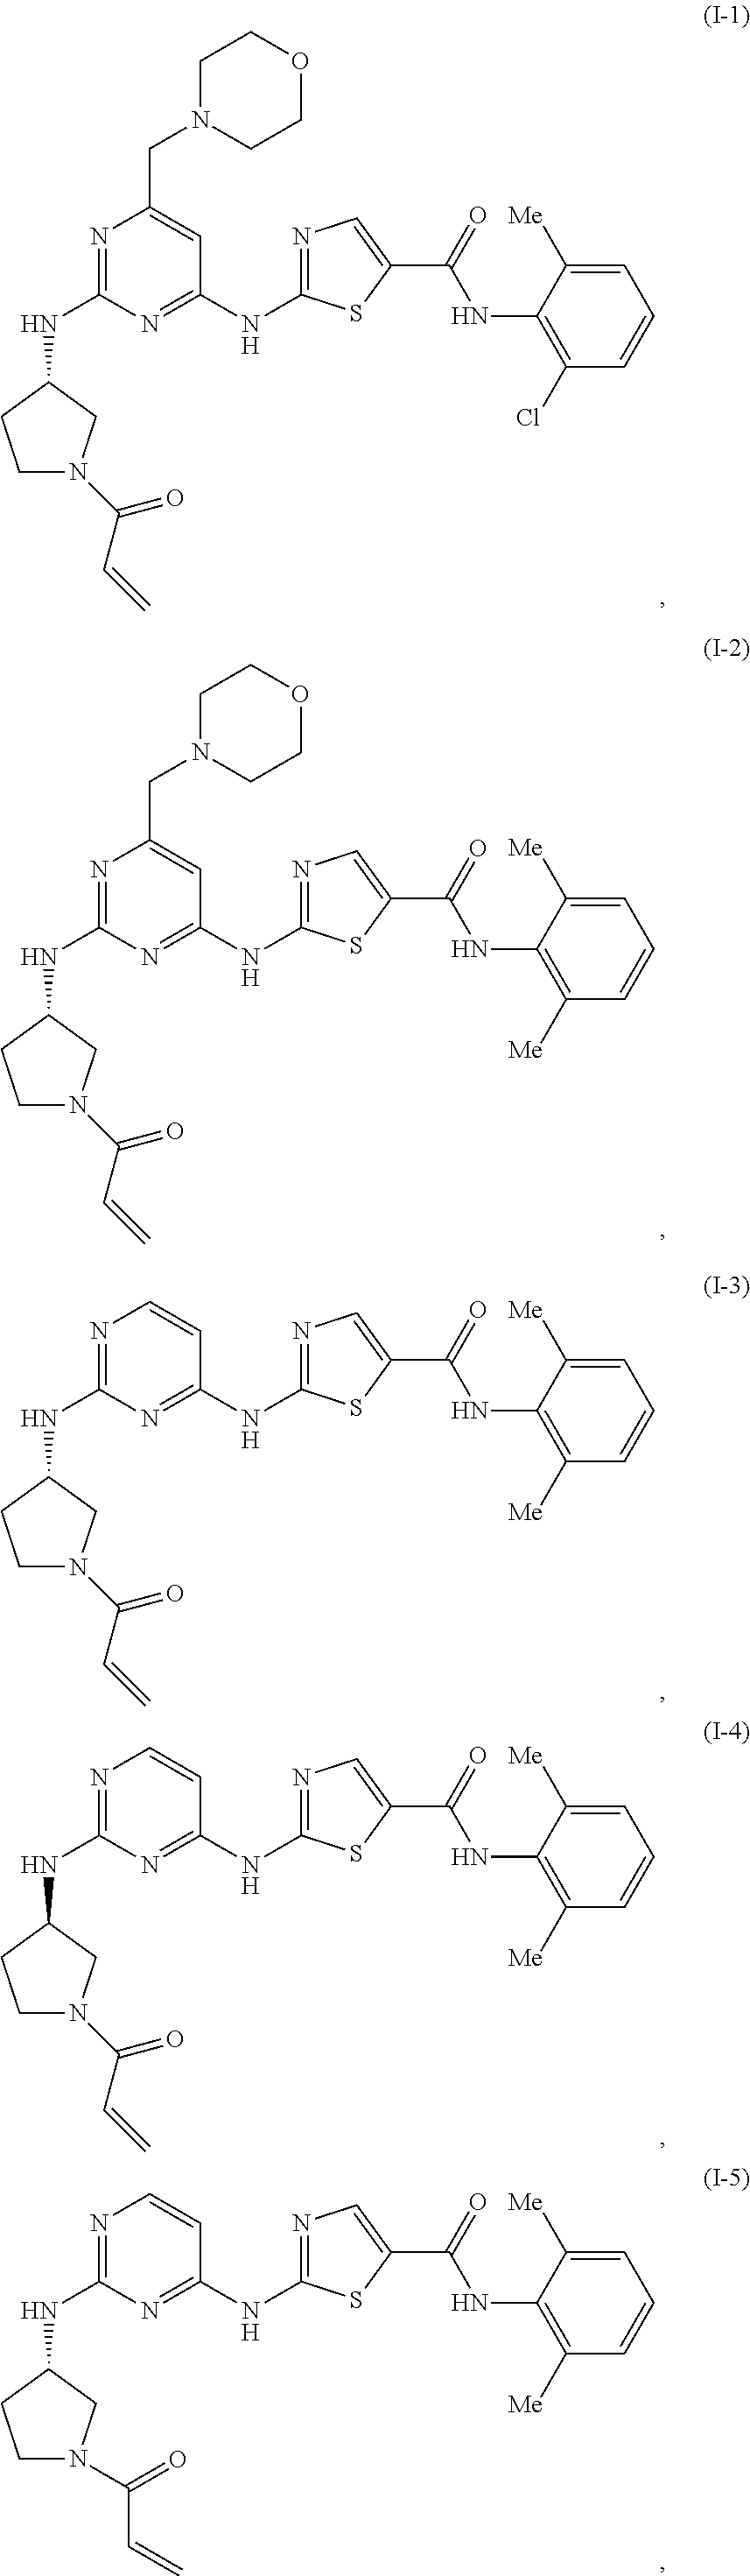 Thiazolyl-containing compounds for treating proliferative diseases